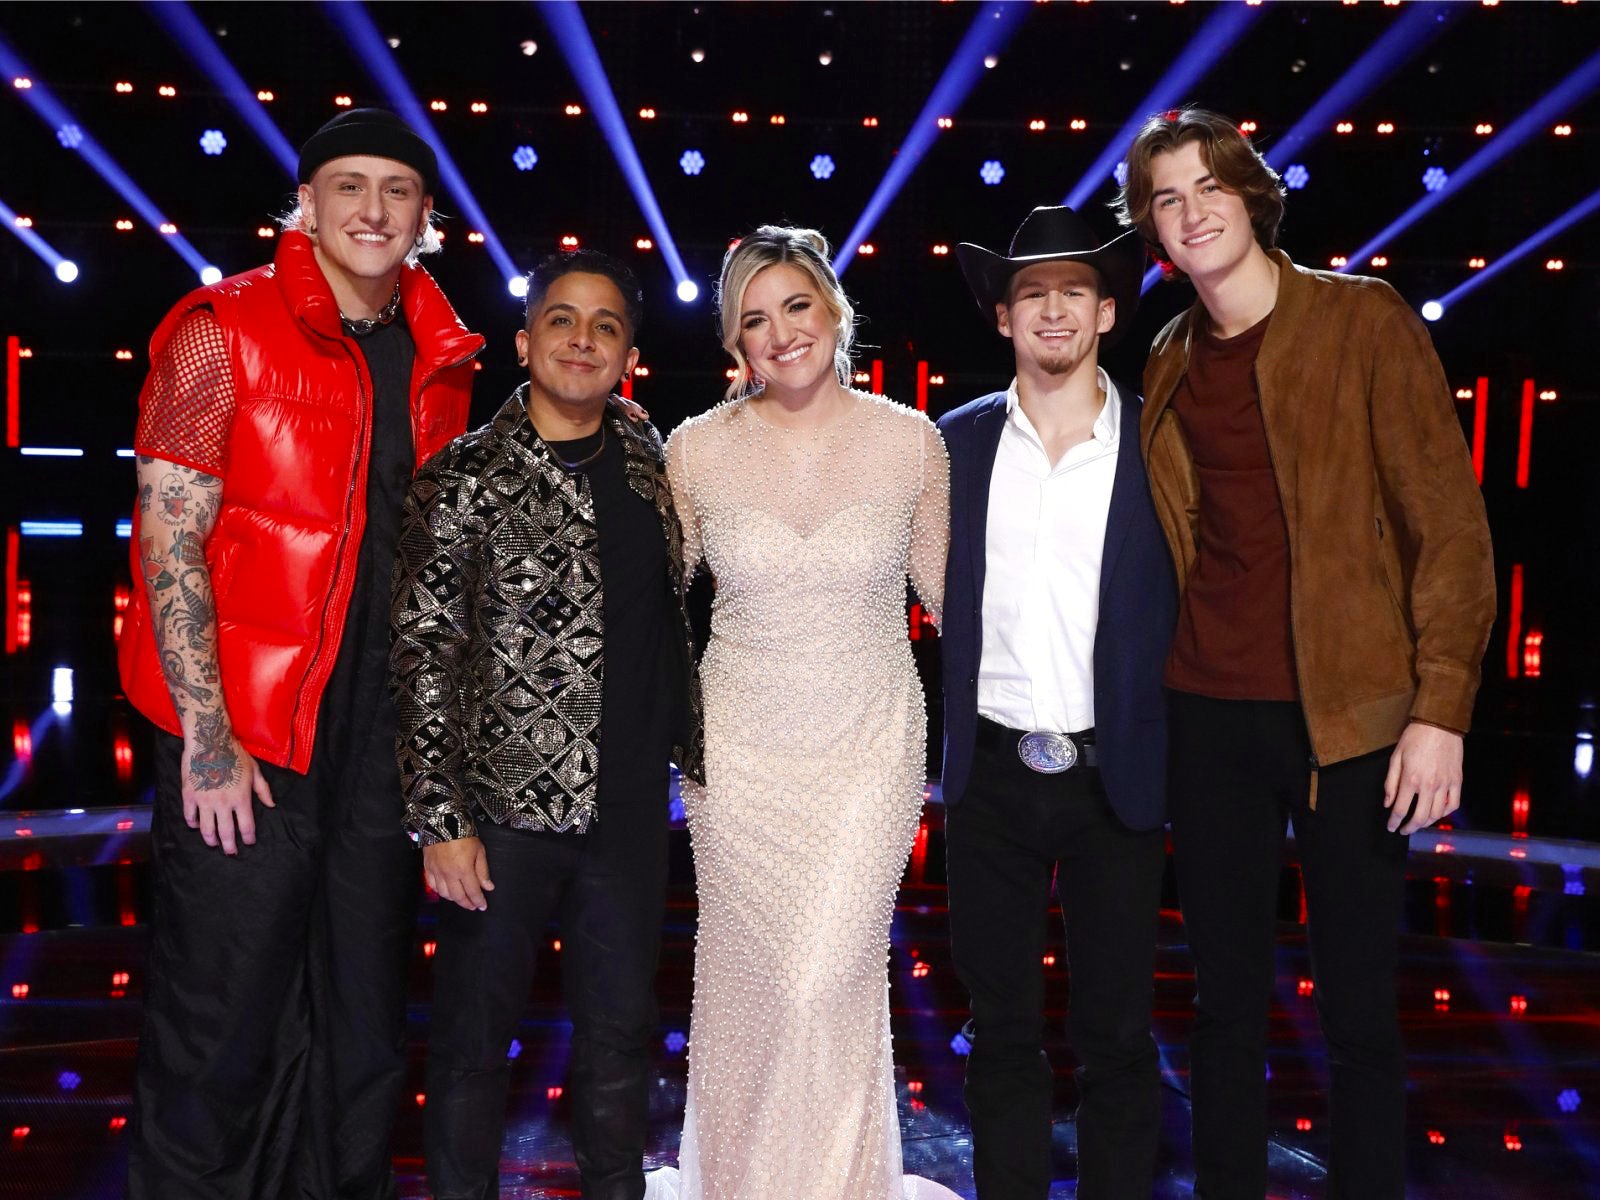 'The Voice' determines Top 5 finalists for Season 22, sending three